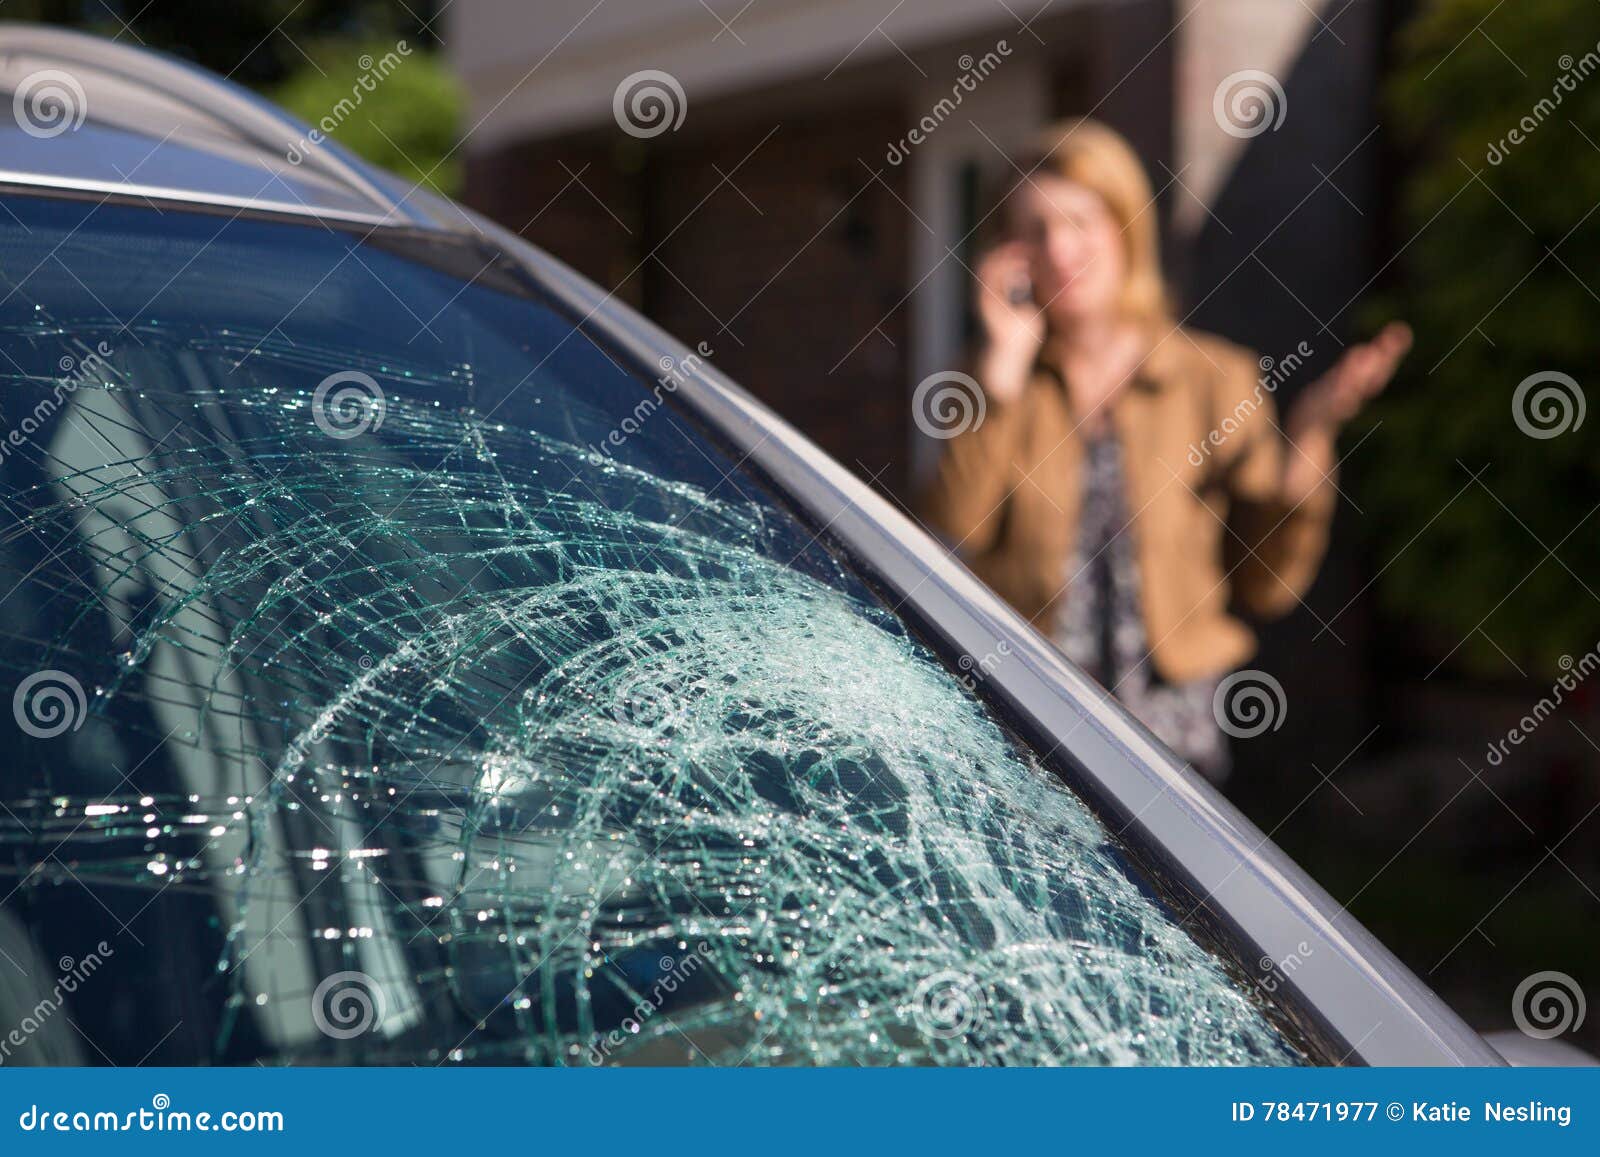 woman phoning for help after car windshield has broken